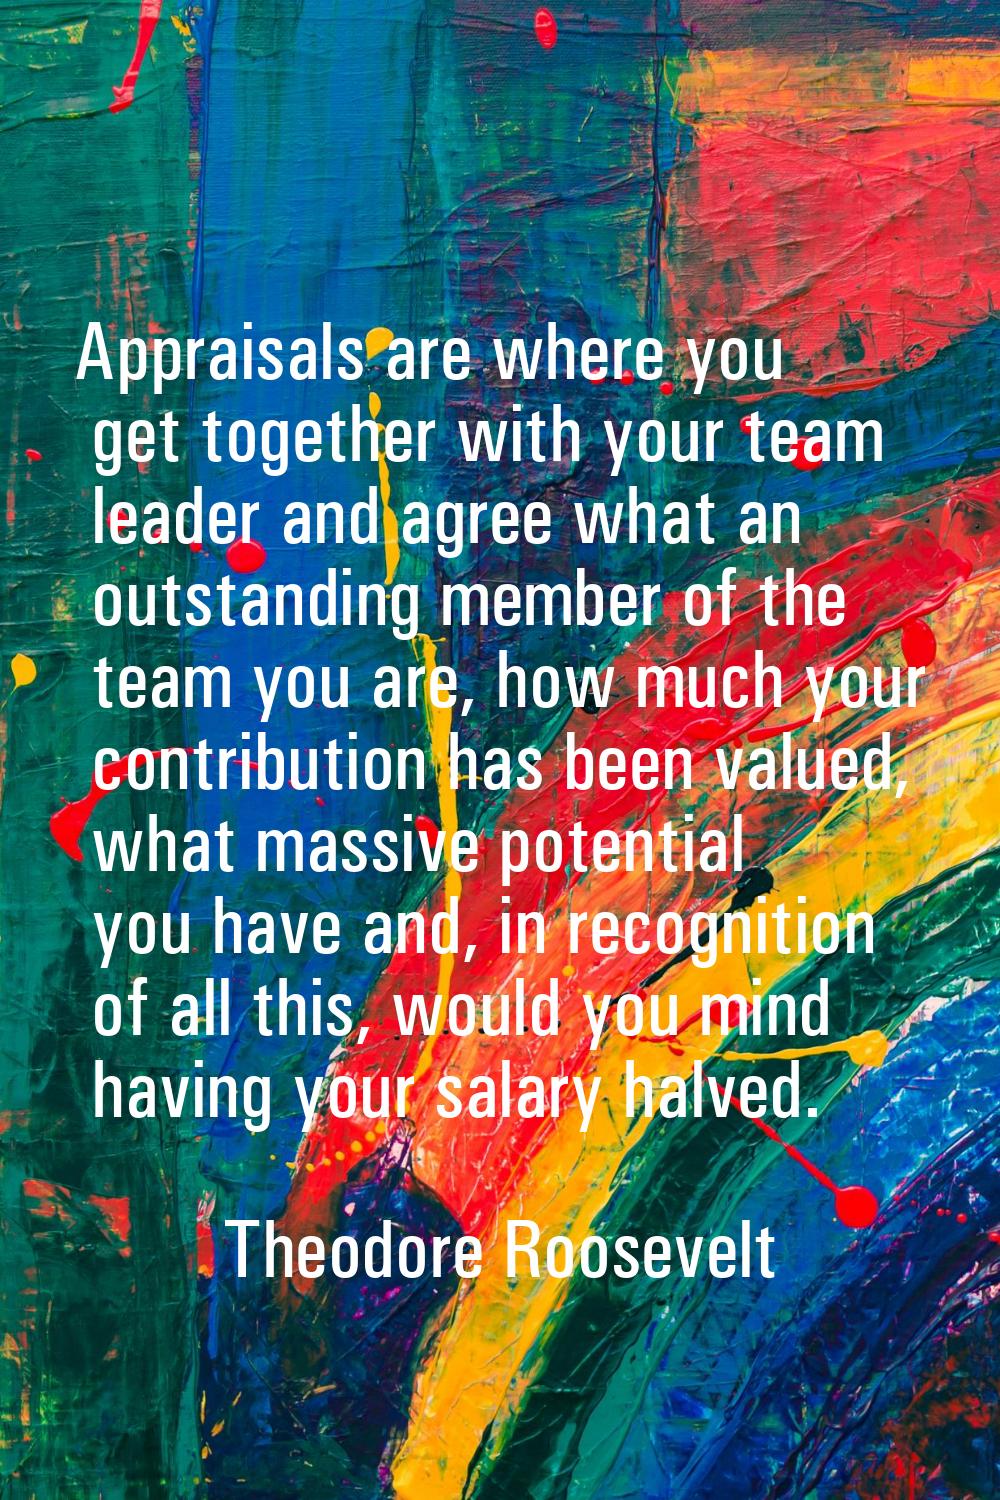 Appraisals are where you get together with your team leader and agree what an outstanding member of